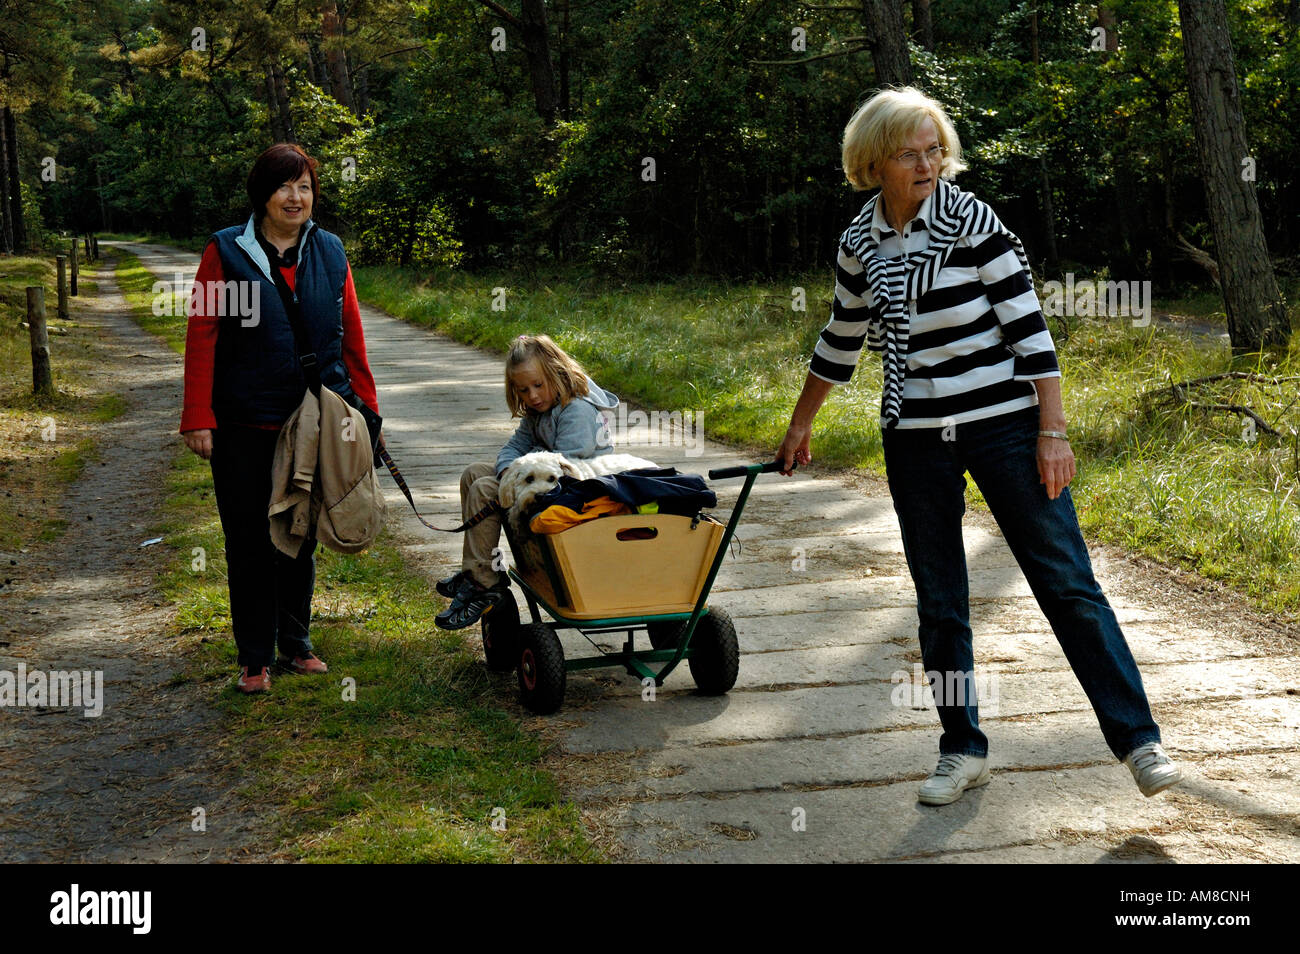 2 women with child, pet dog and wagon taking a rest on track in forest, Northern Germany. Stock Photo